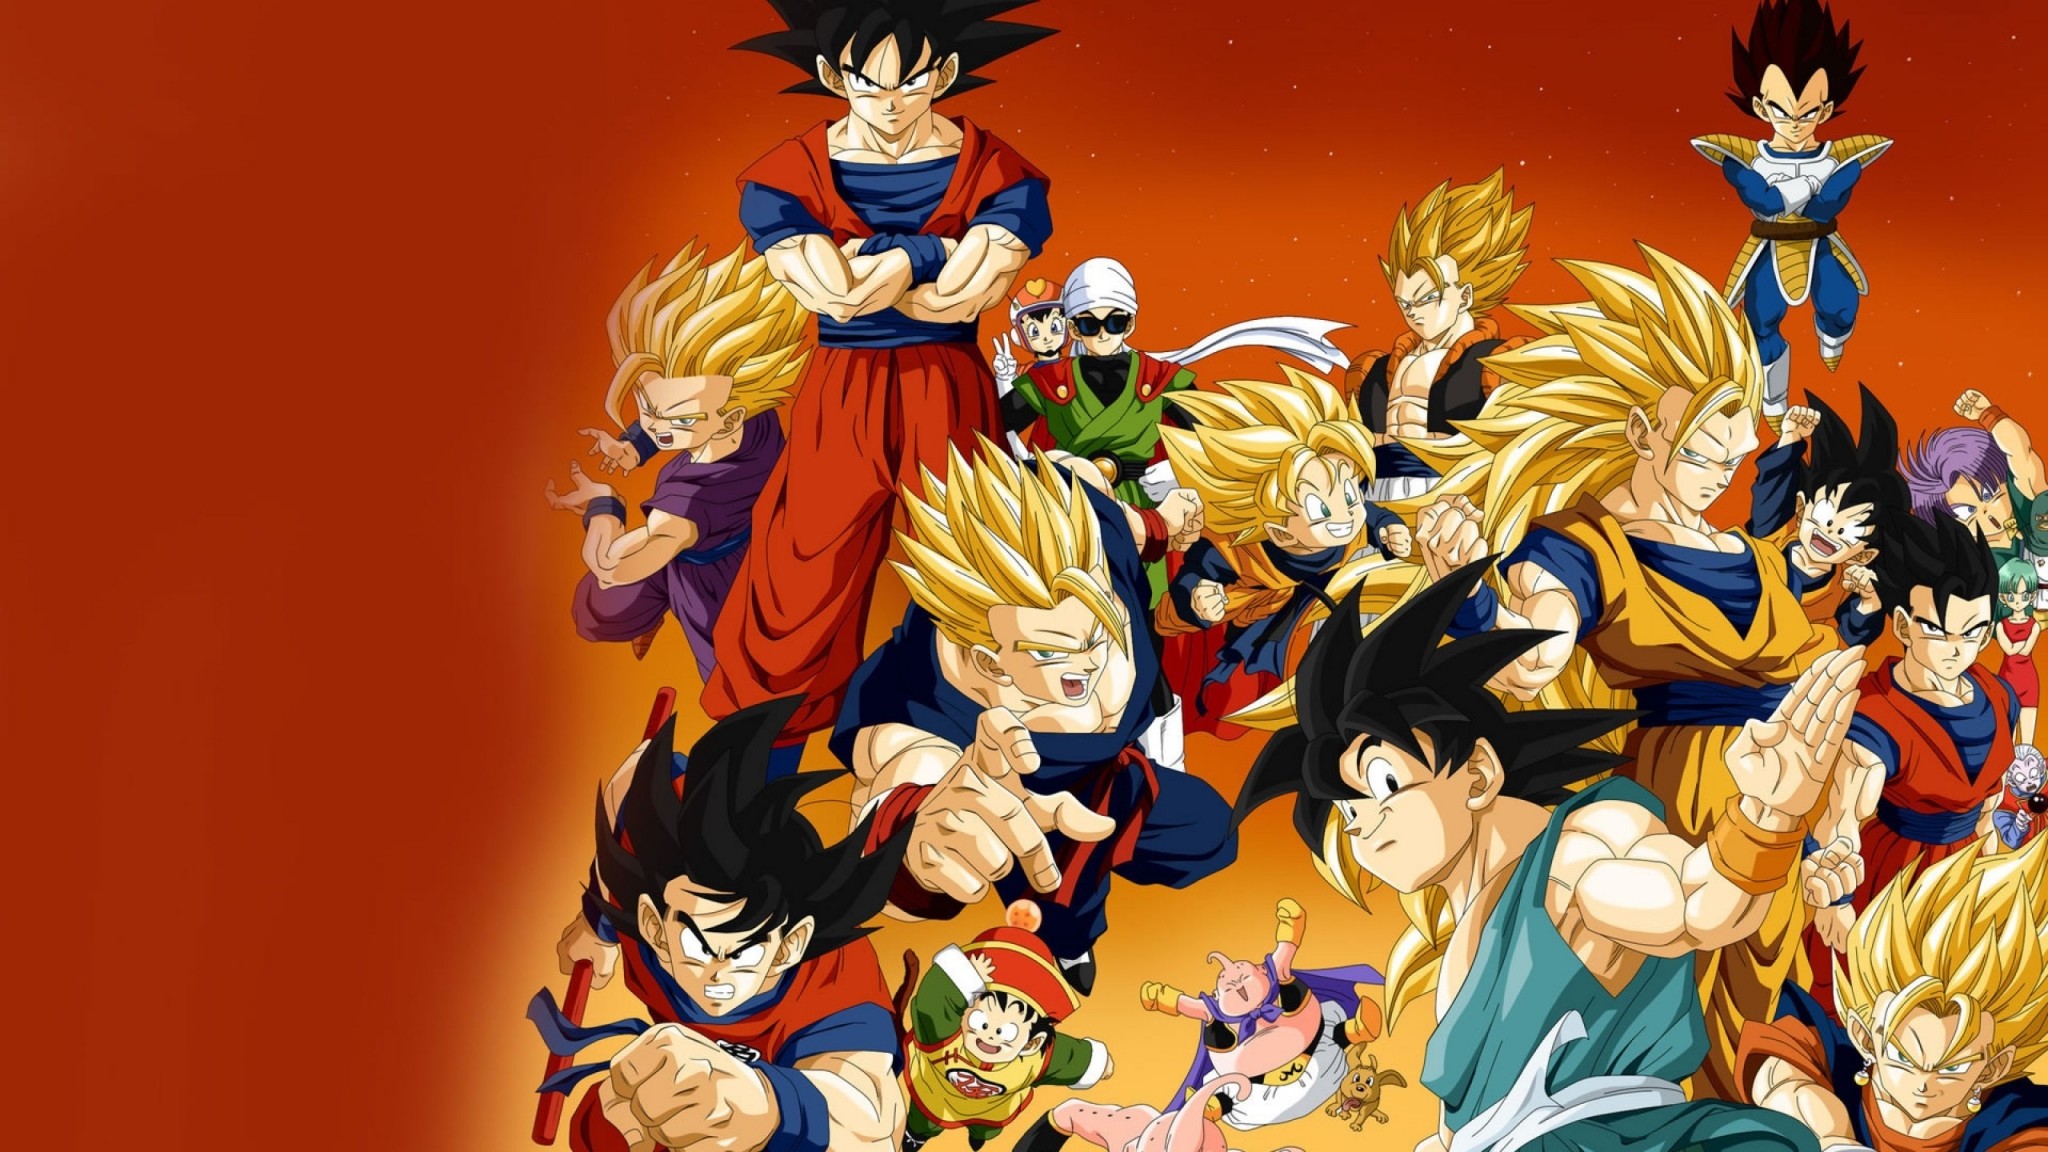 2048x1152 dragon ball z wallpaper for desktop background a download awesome